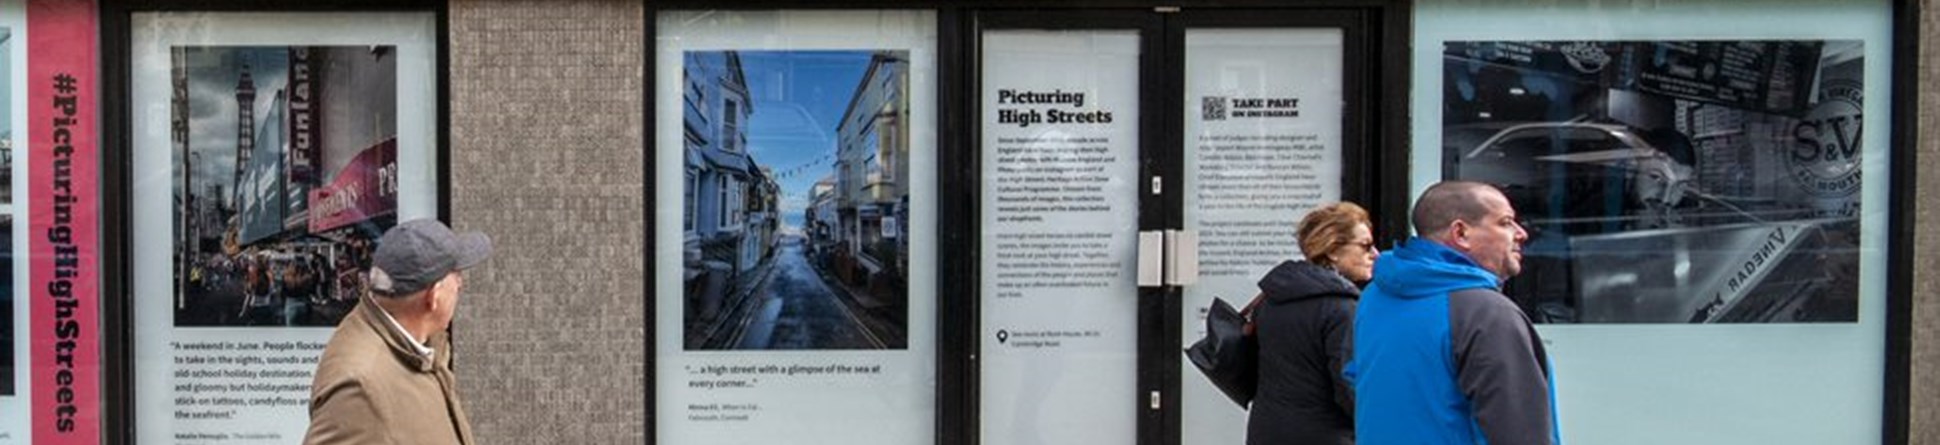 Three people and a dog walking past a building with Picturing High Streets images being exhibited in the windows.